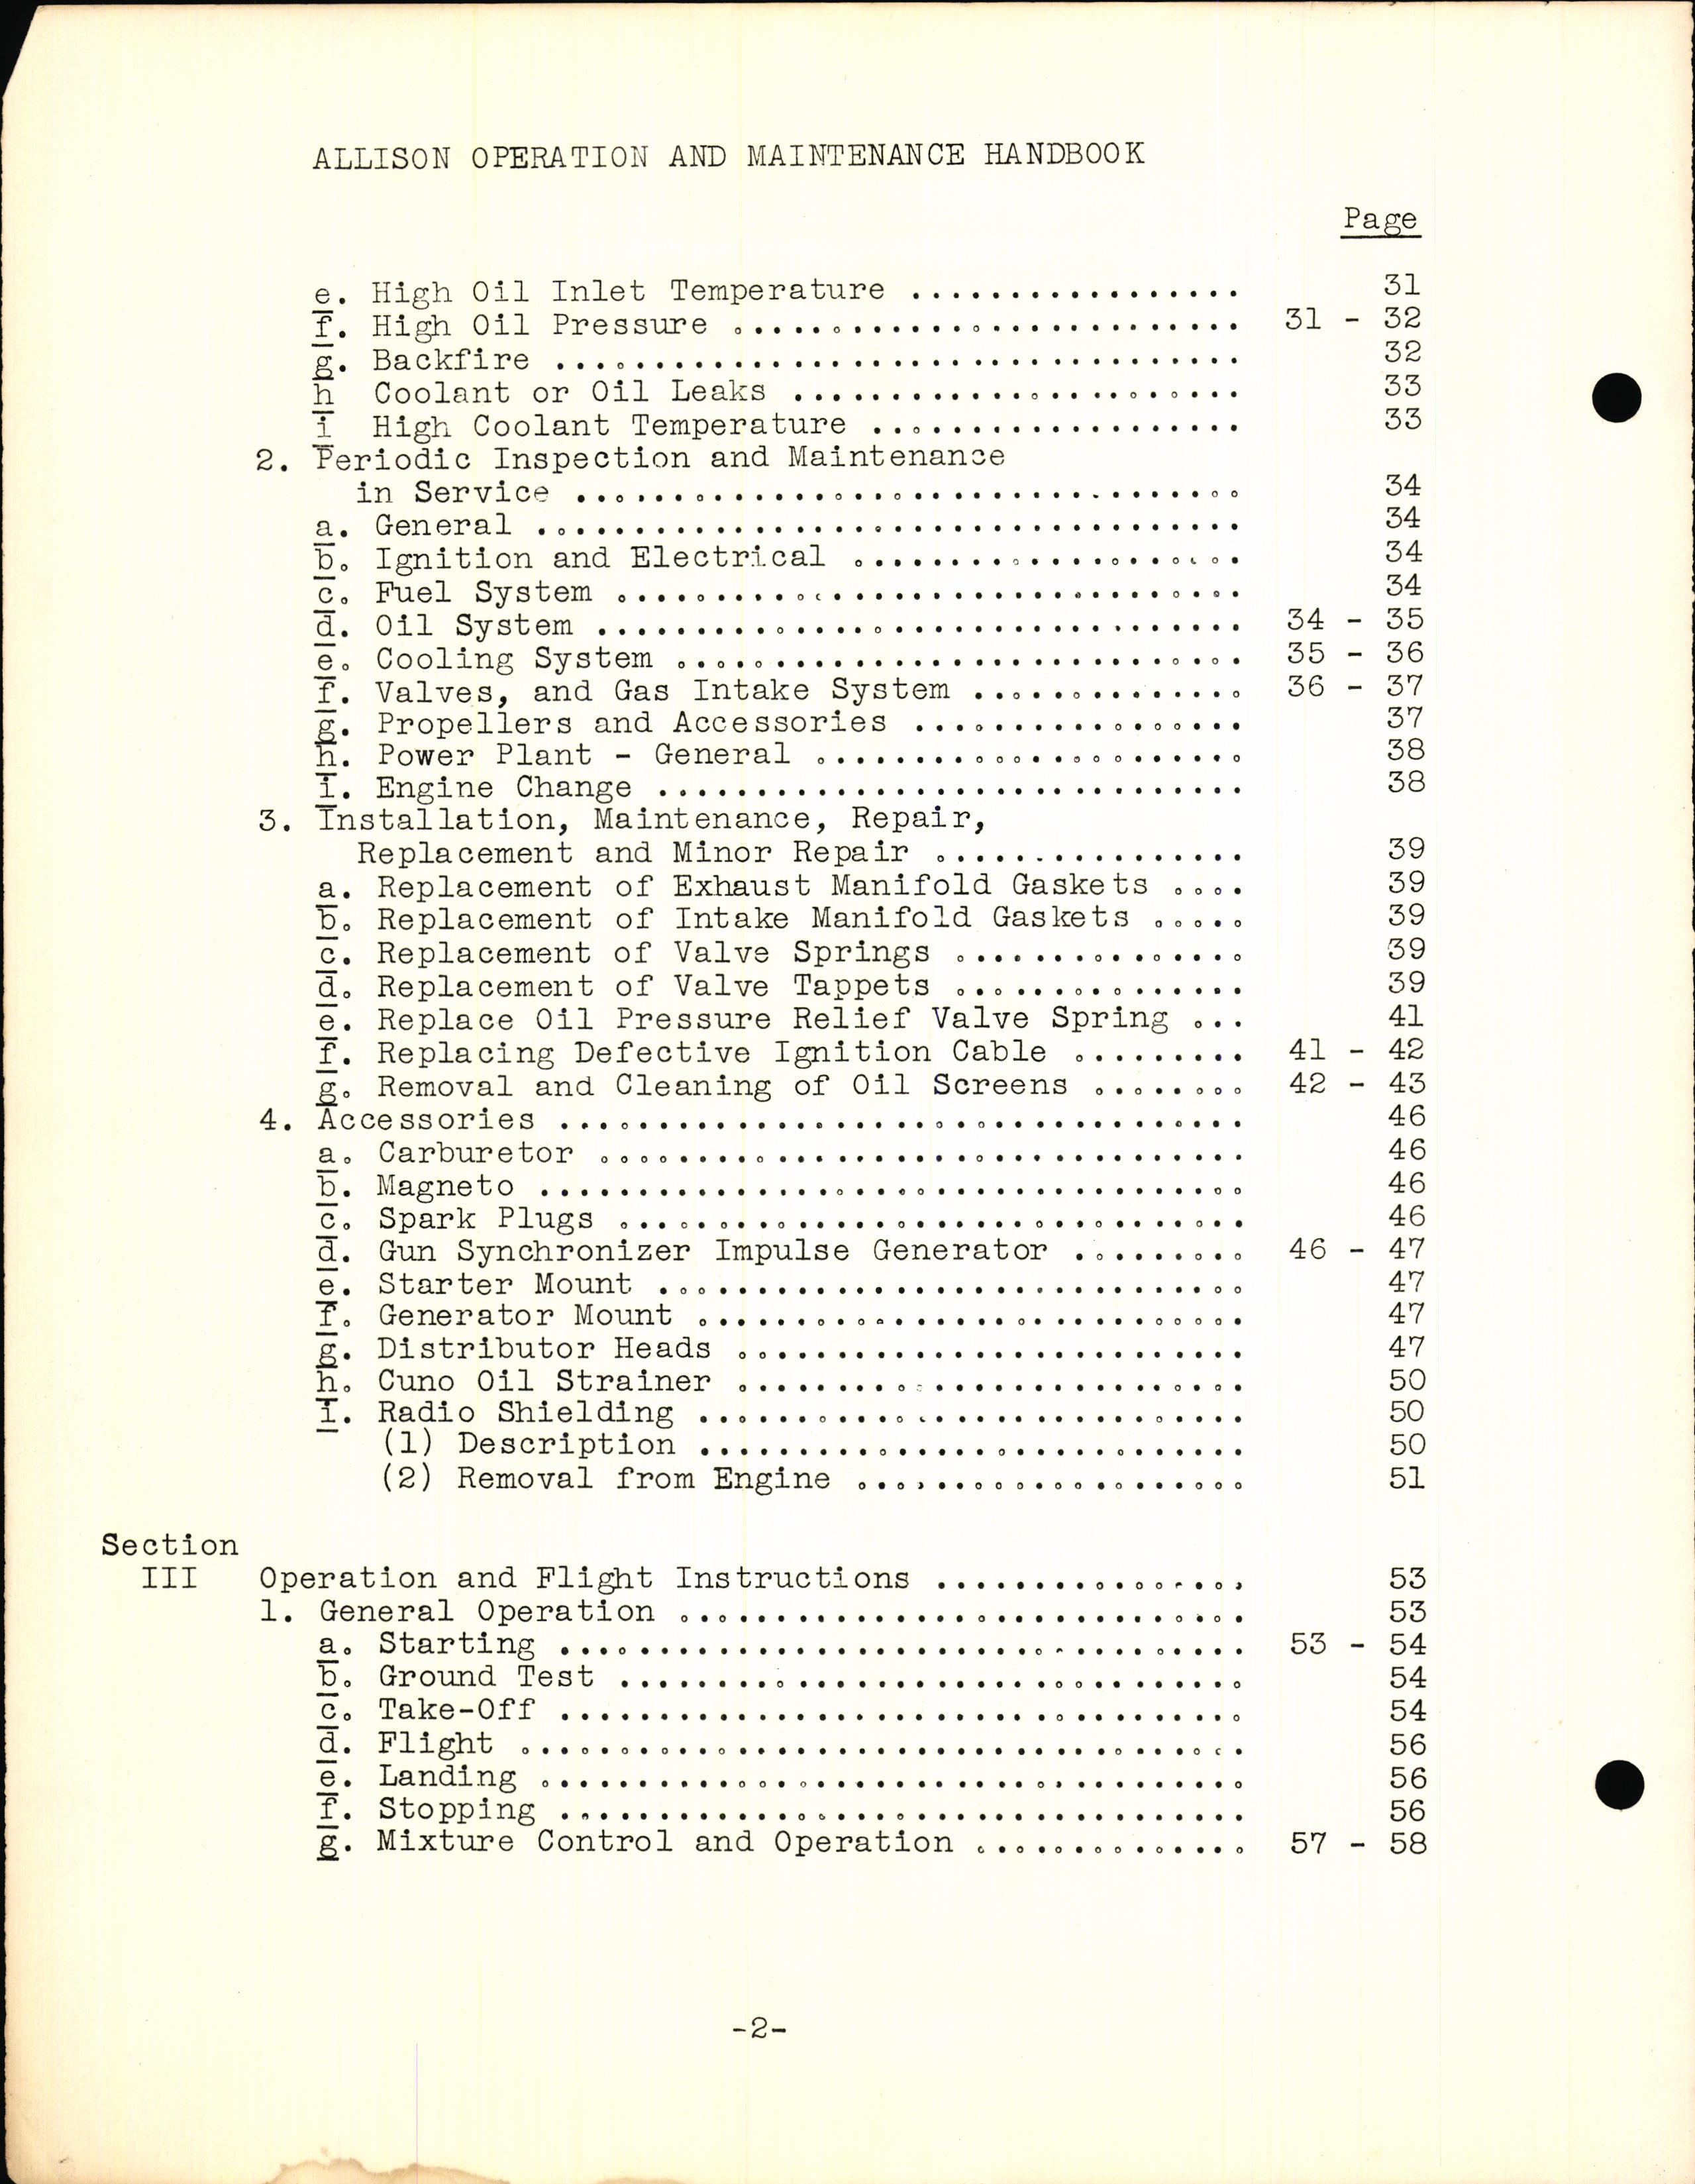 Sample page 8 from AirCorps Library document: Operation, Maintenance & Overhaul Handbook for Model V-1710-C15